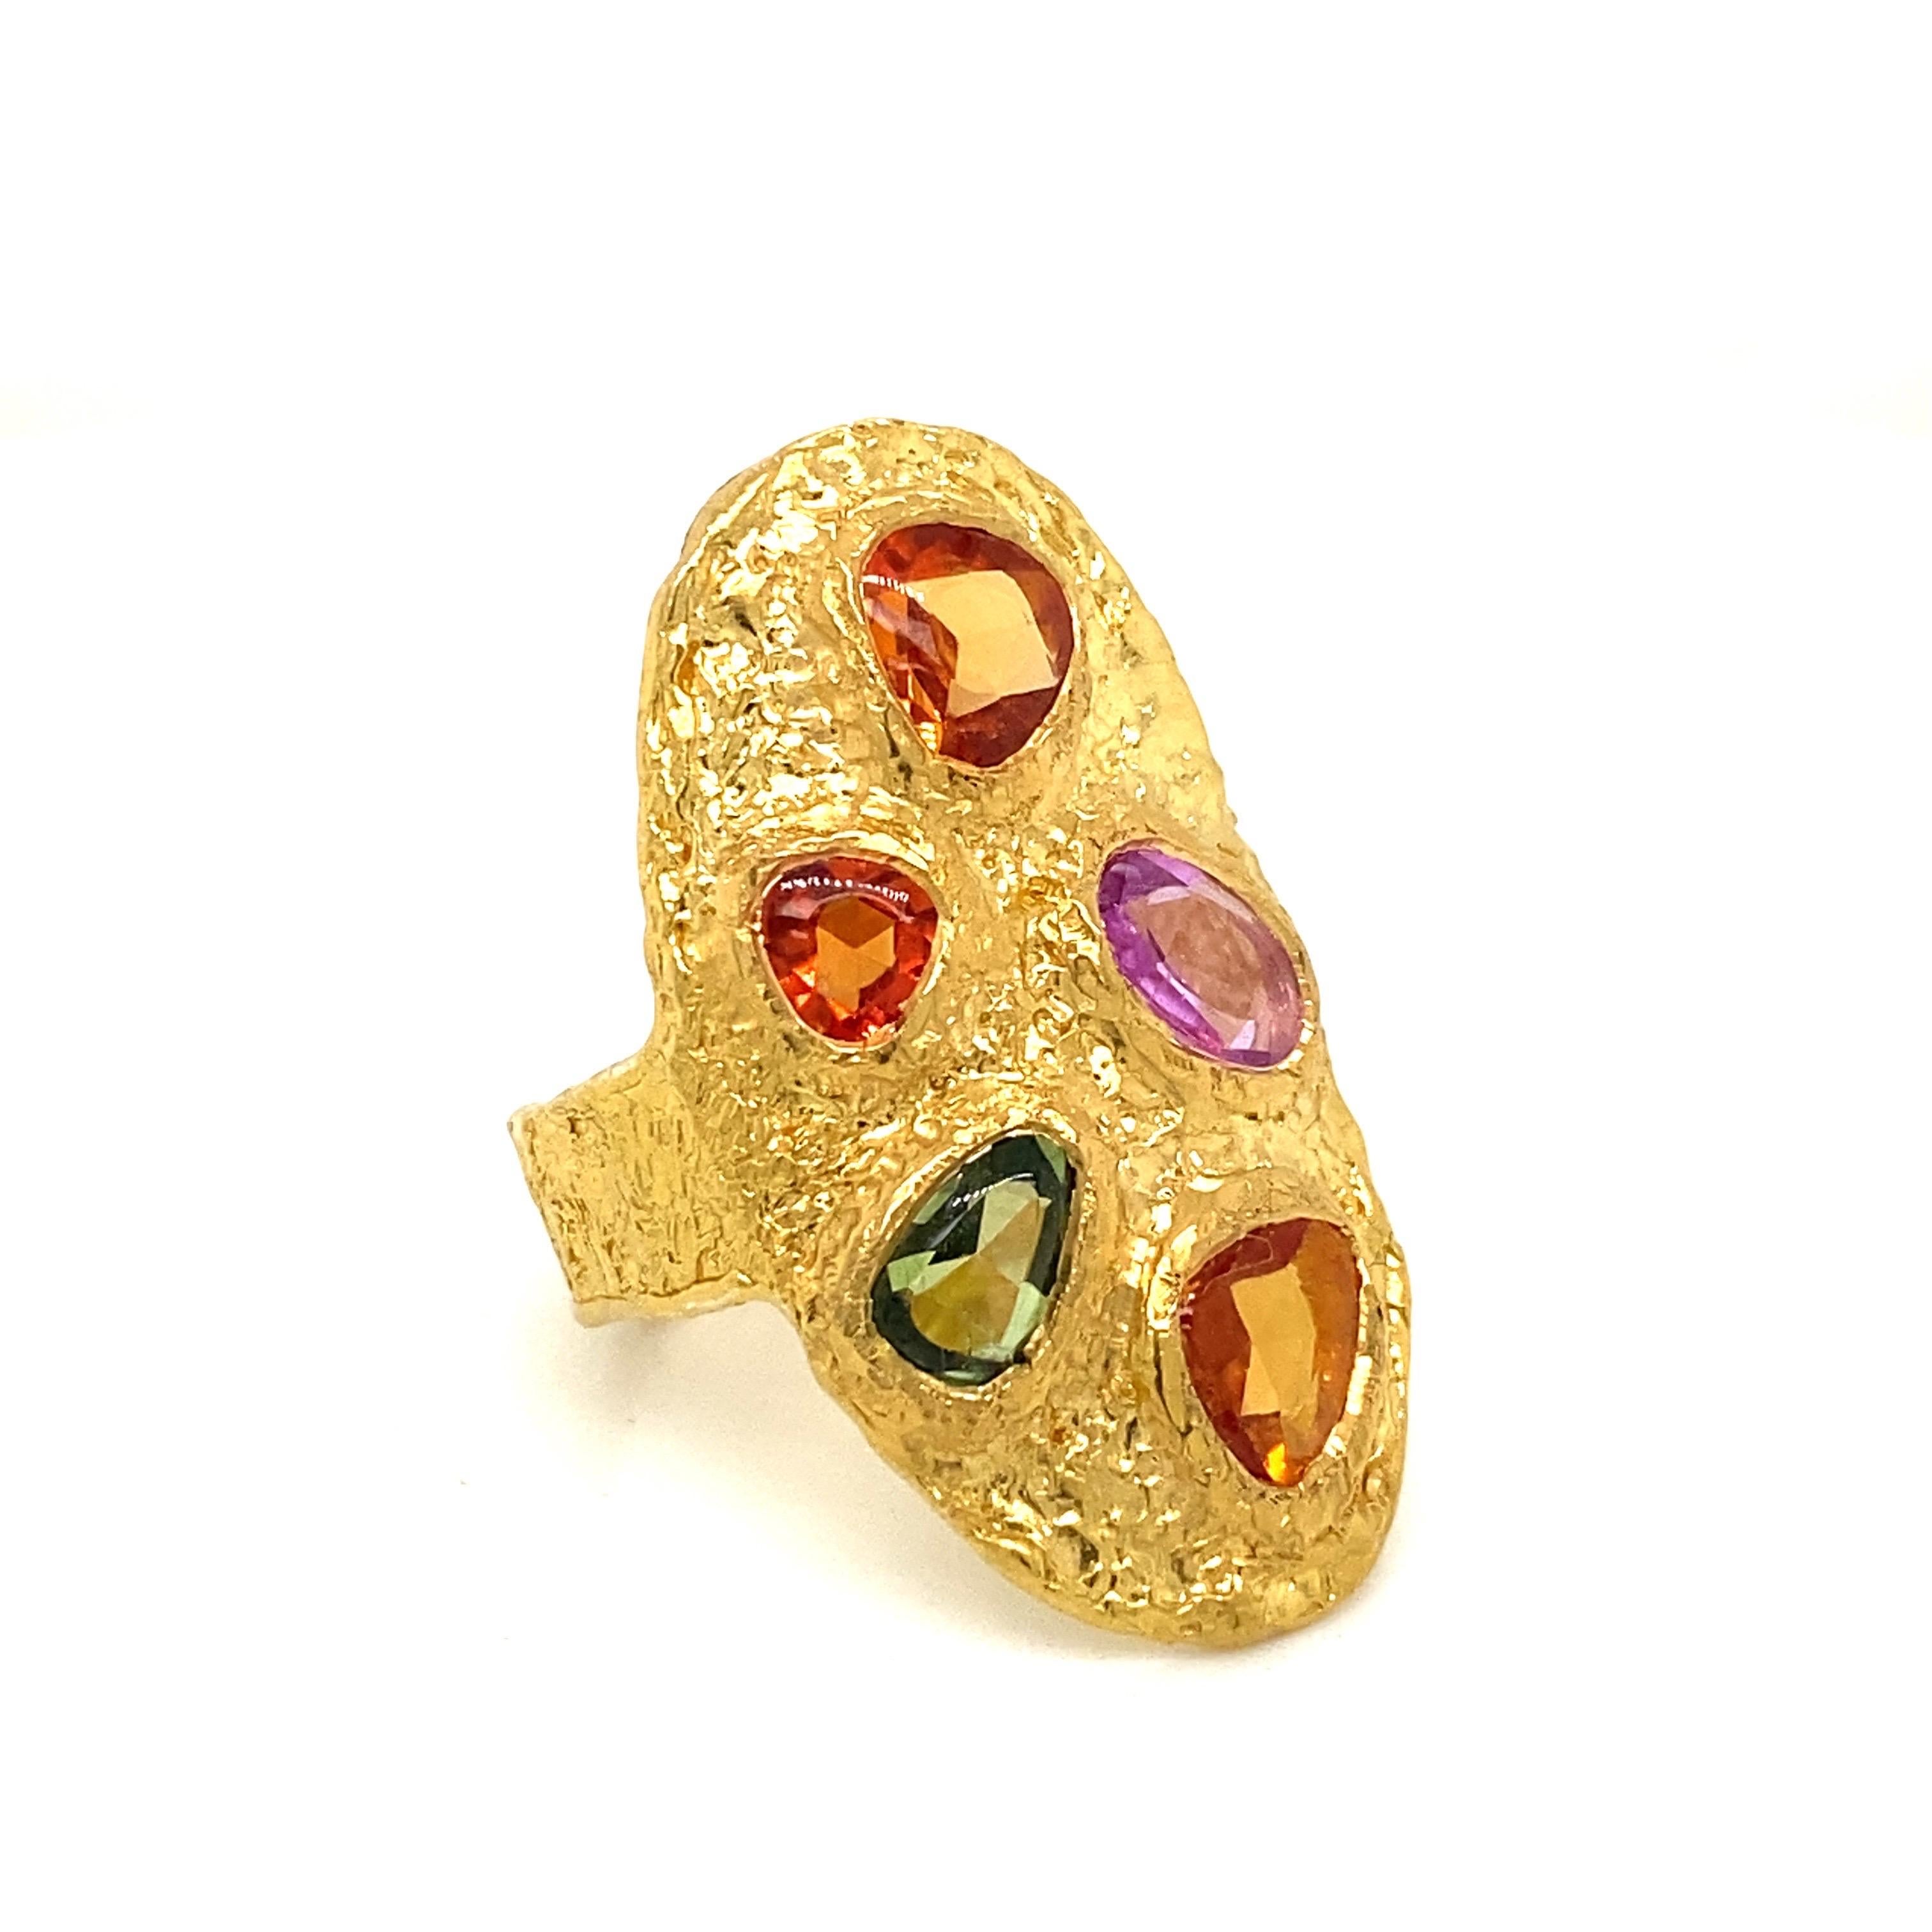 From the vault at Emilio Jewelry located on New York's iconic Fifth Avenue,
Featuring 5 ancient cut multi color sapphires, totally approximately 3.50 carats. Each stone is totally unique...gorgeous purple, orange, peach, green,blue, pink sapphires